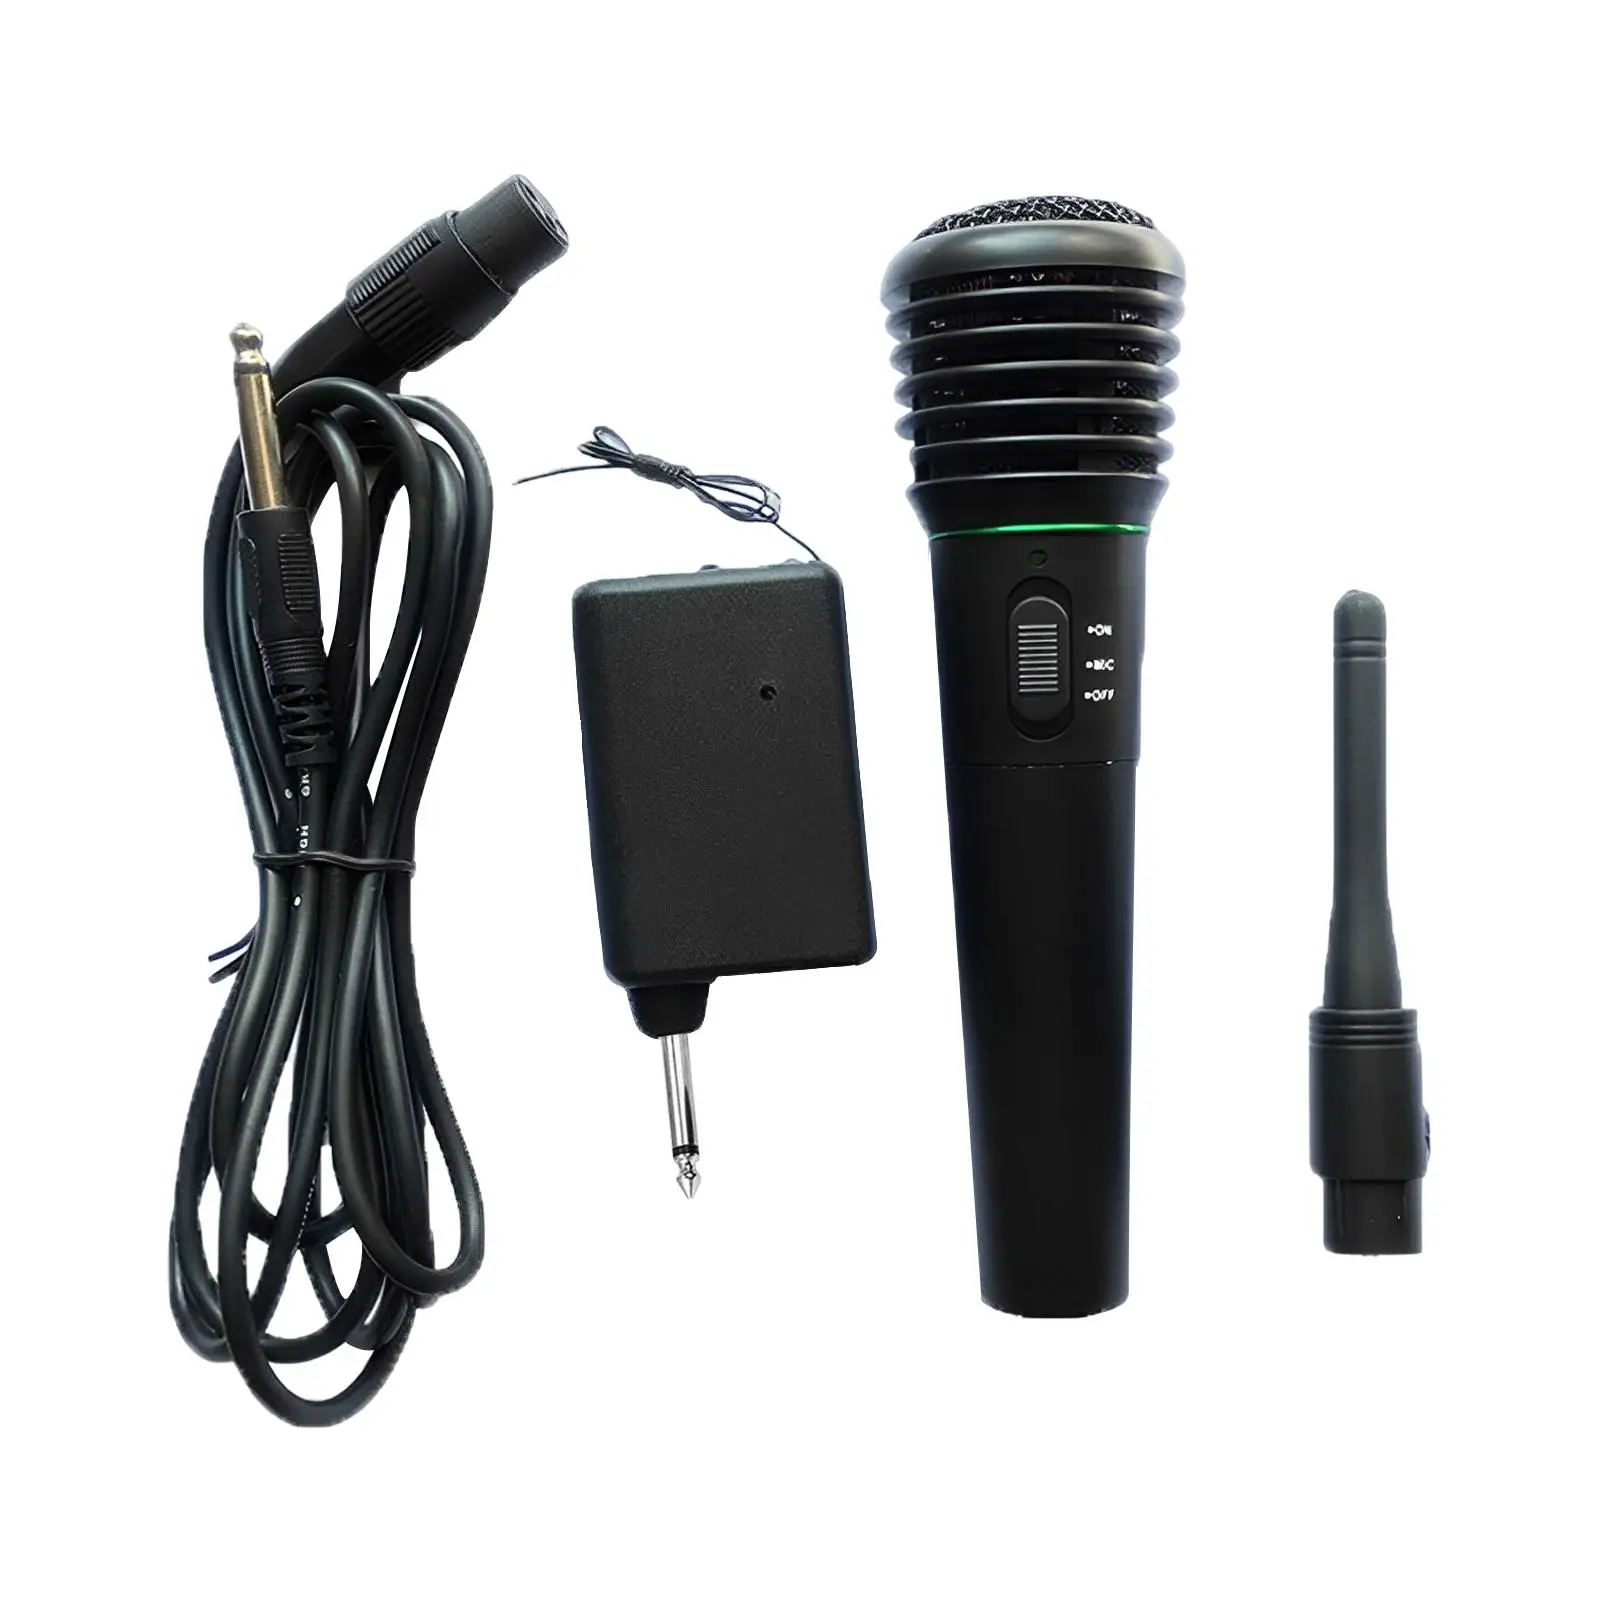 Professional Dual Usages Durable Long Range Cordless Microphone for Smart TV Tablet Computer Karaoke Singing Family Party